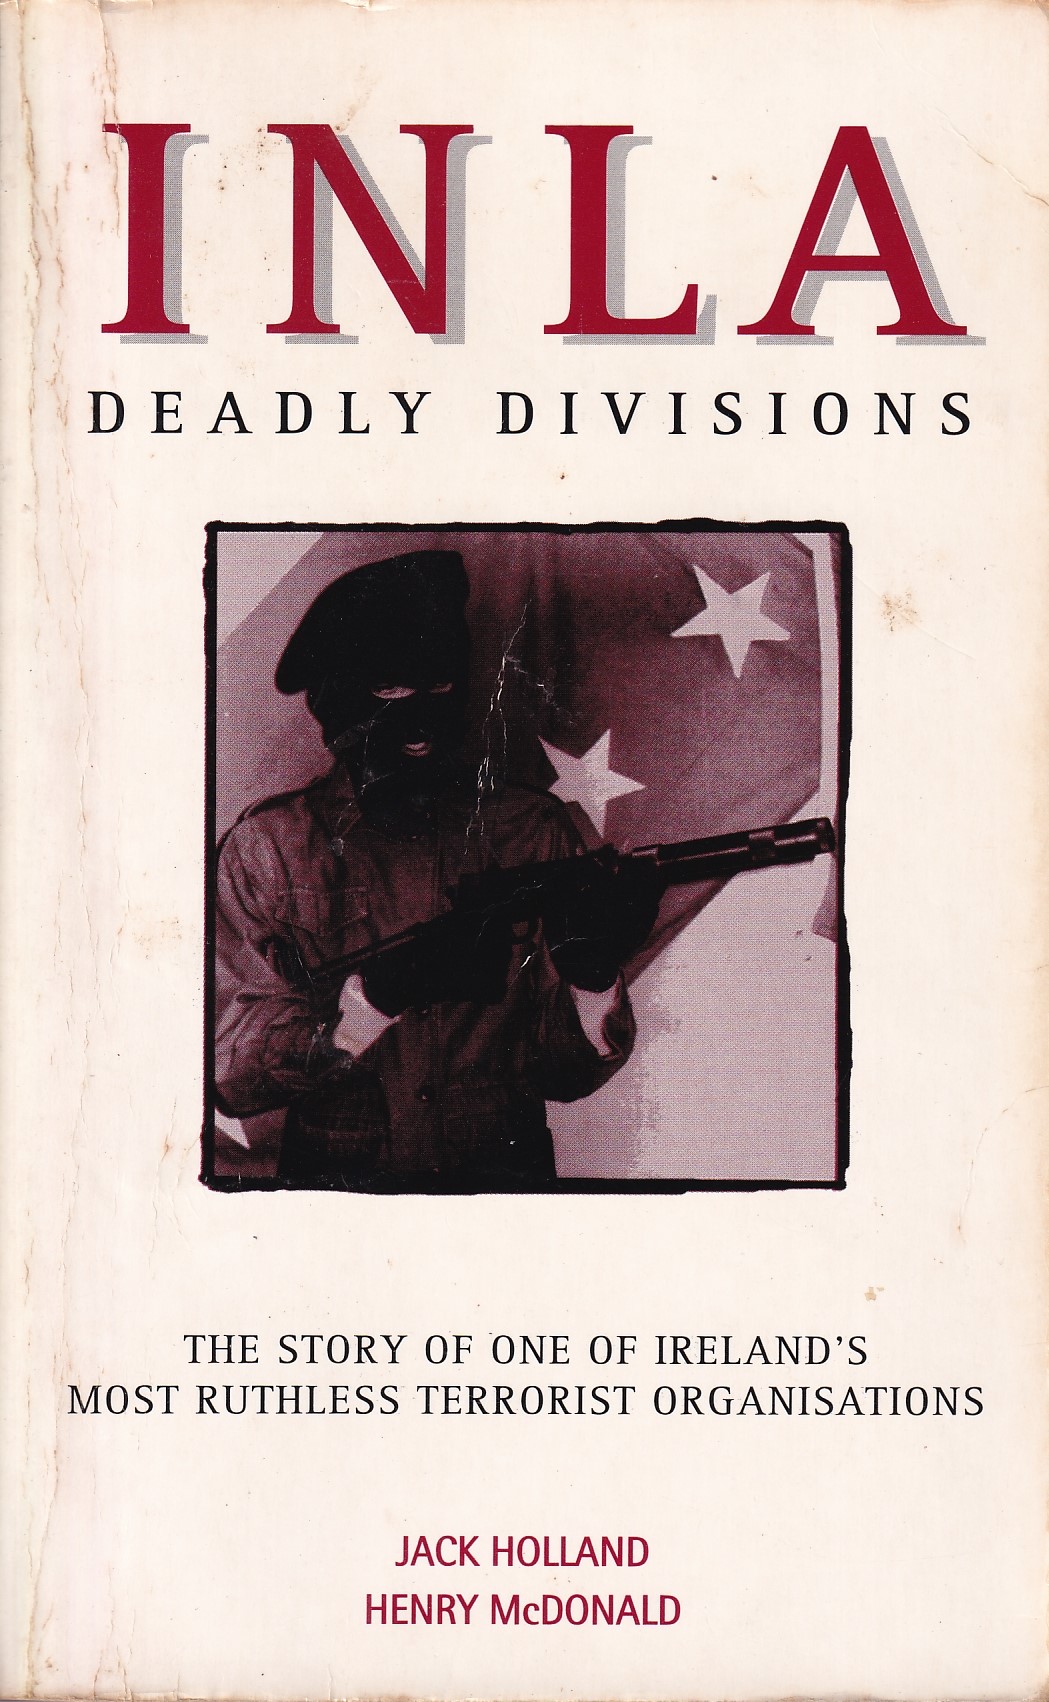 INLA: Deadly Divisions – The Story of One of Ireland’s Most Ruthless Terrorist Organisations by Jack Holland & Henry McDonald